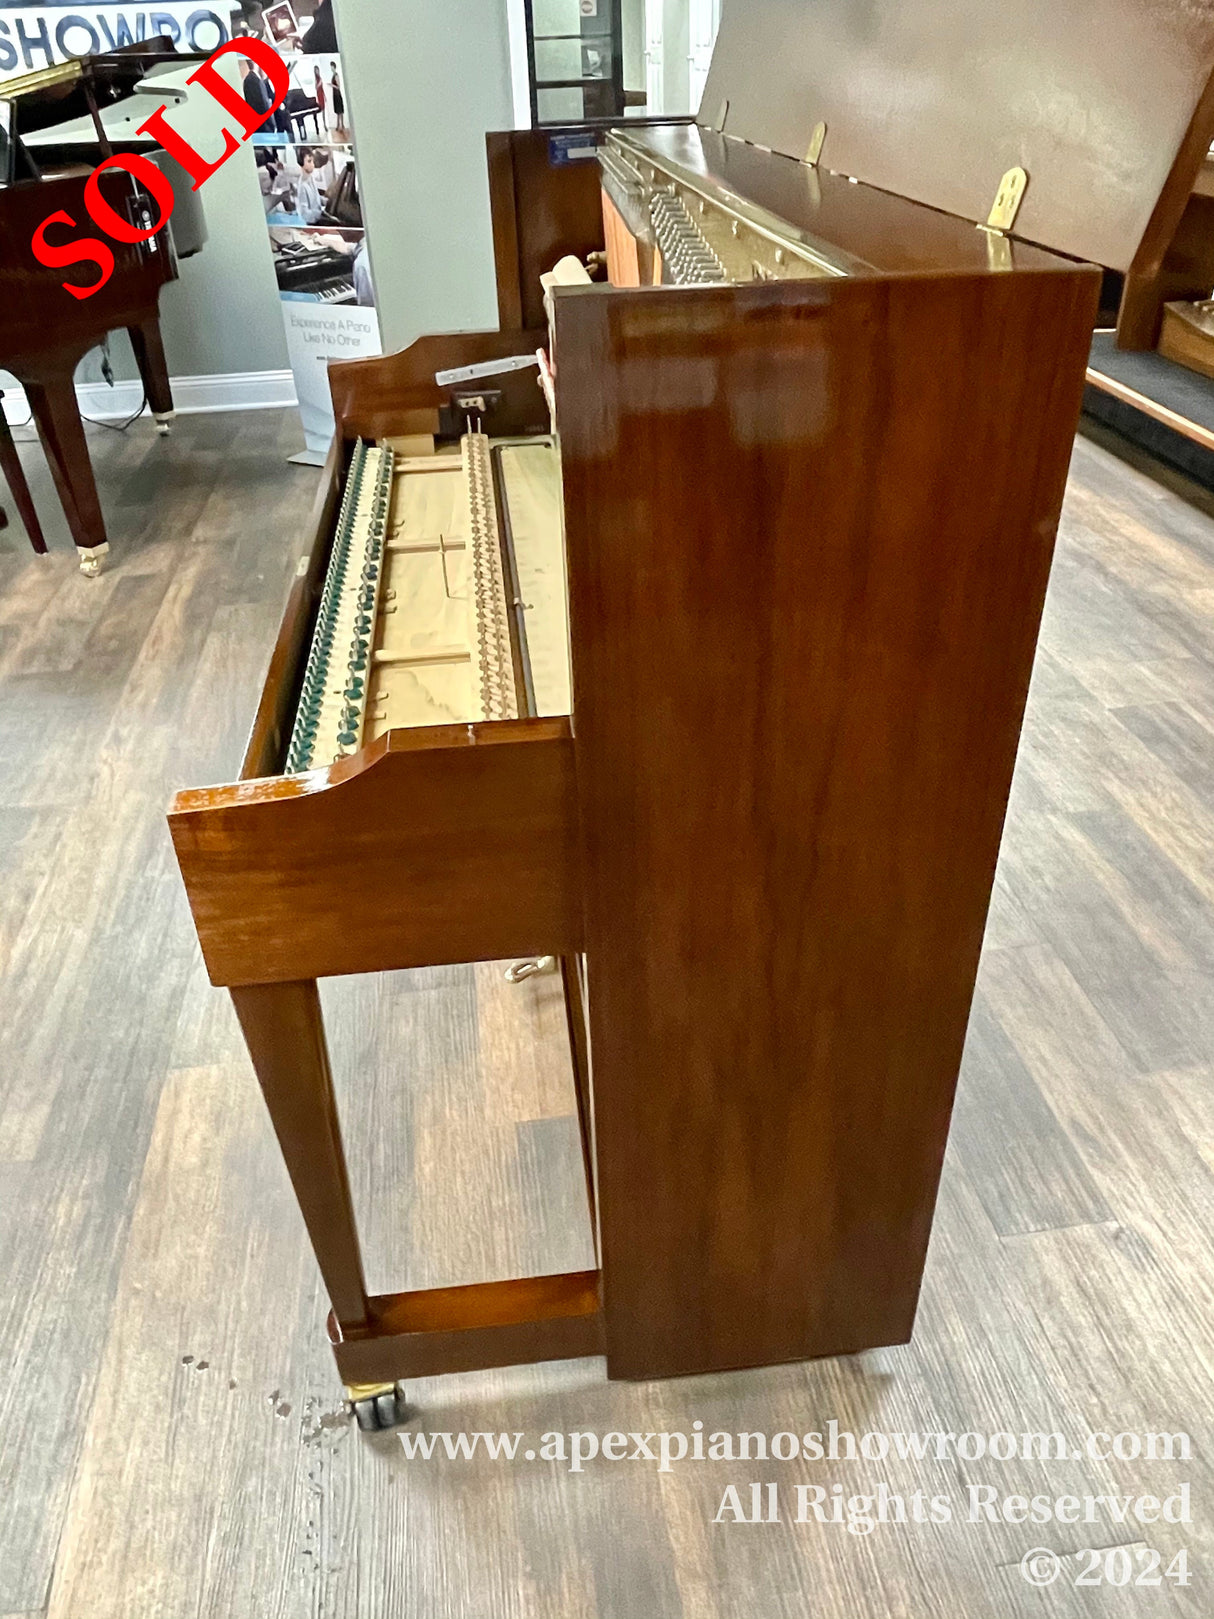 An open upright piano with its mechanism exposed, positioned in a piano showroom with hardwood flooring — a polished mahogany finish is prominent on its surface.